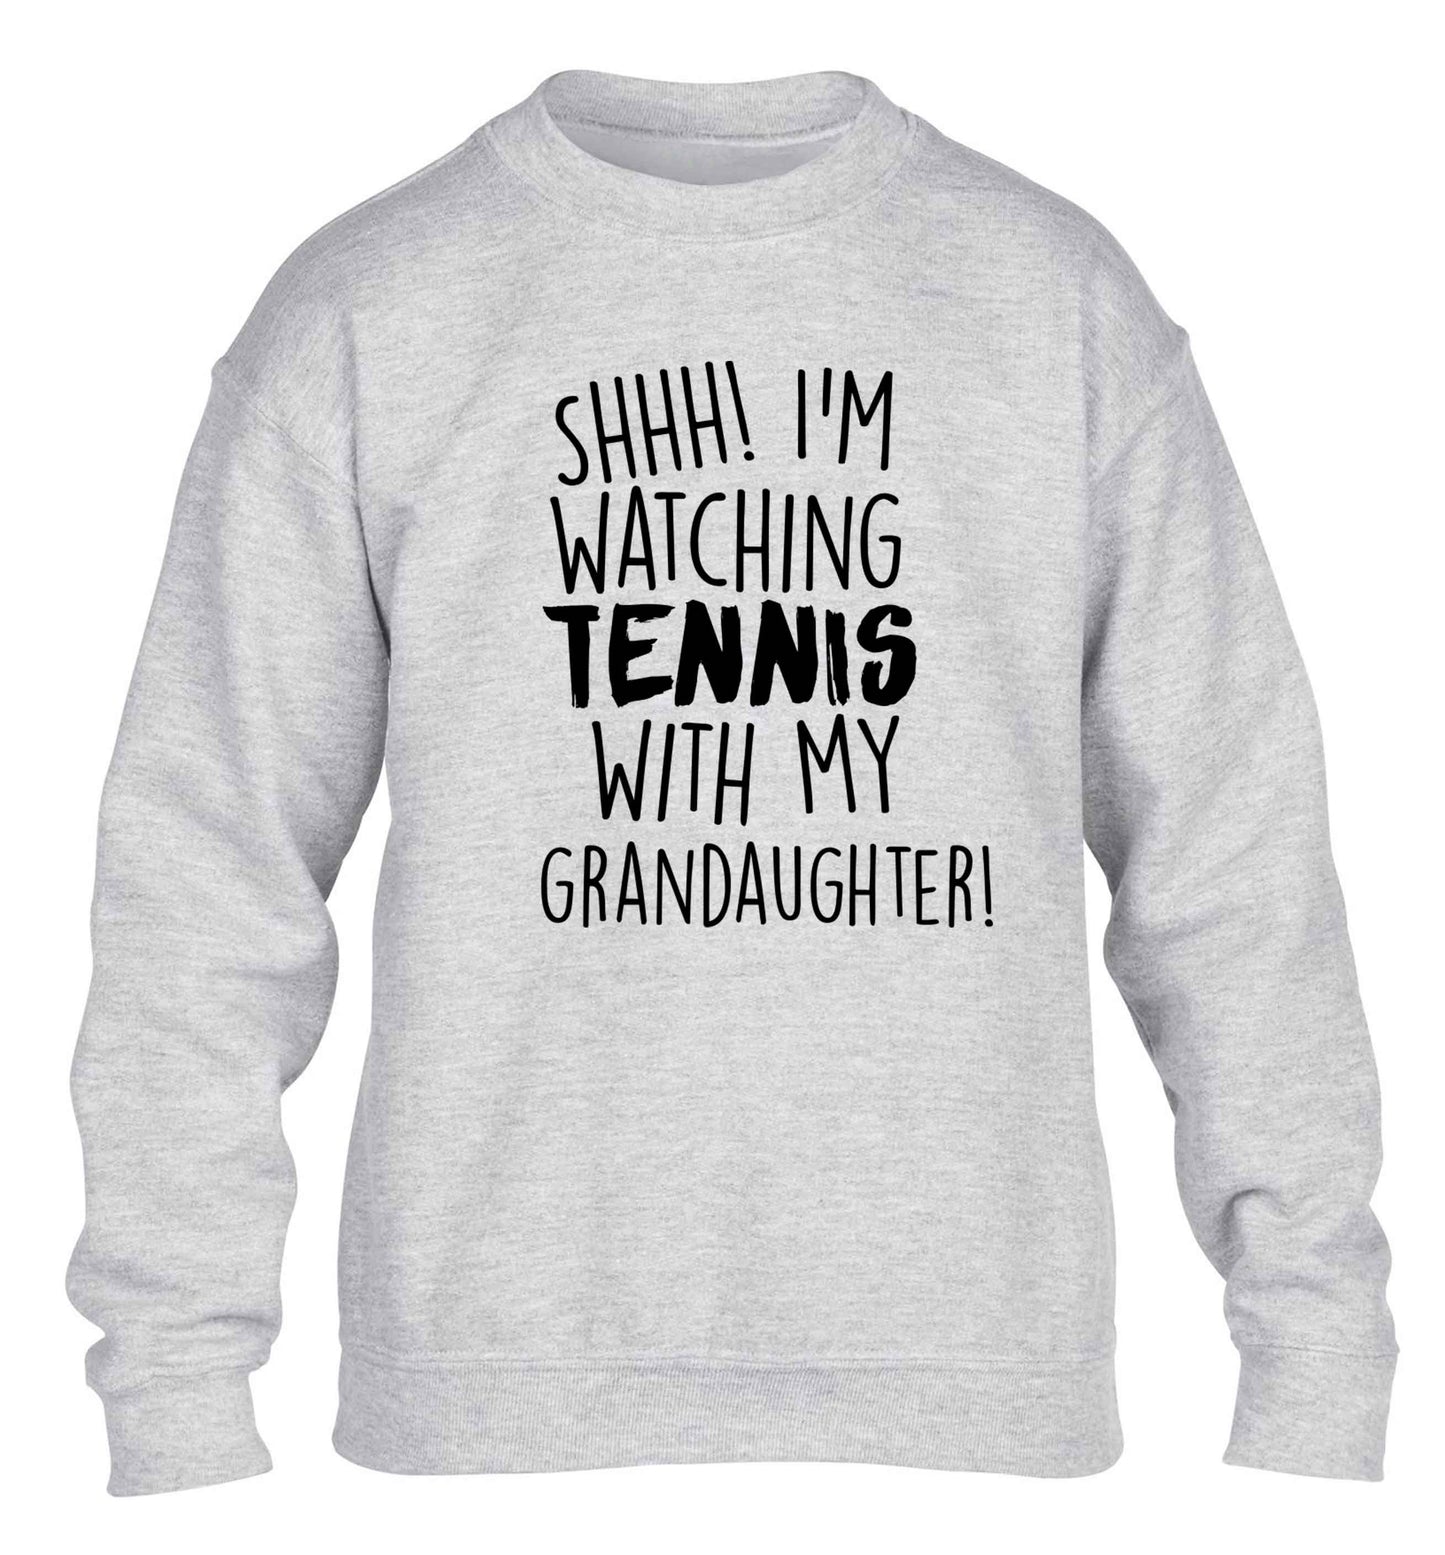 Shh! I'm watching tennis with my granddaughter! children's grey sweater 12-13 Years